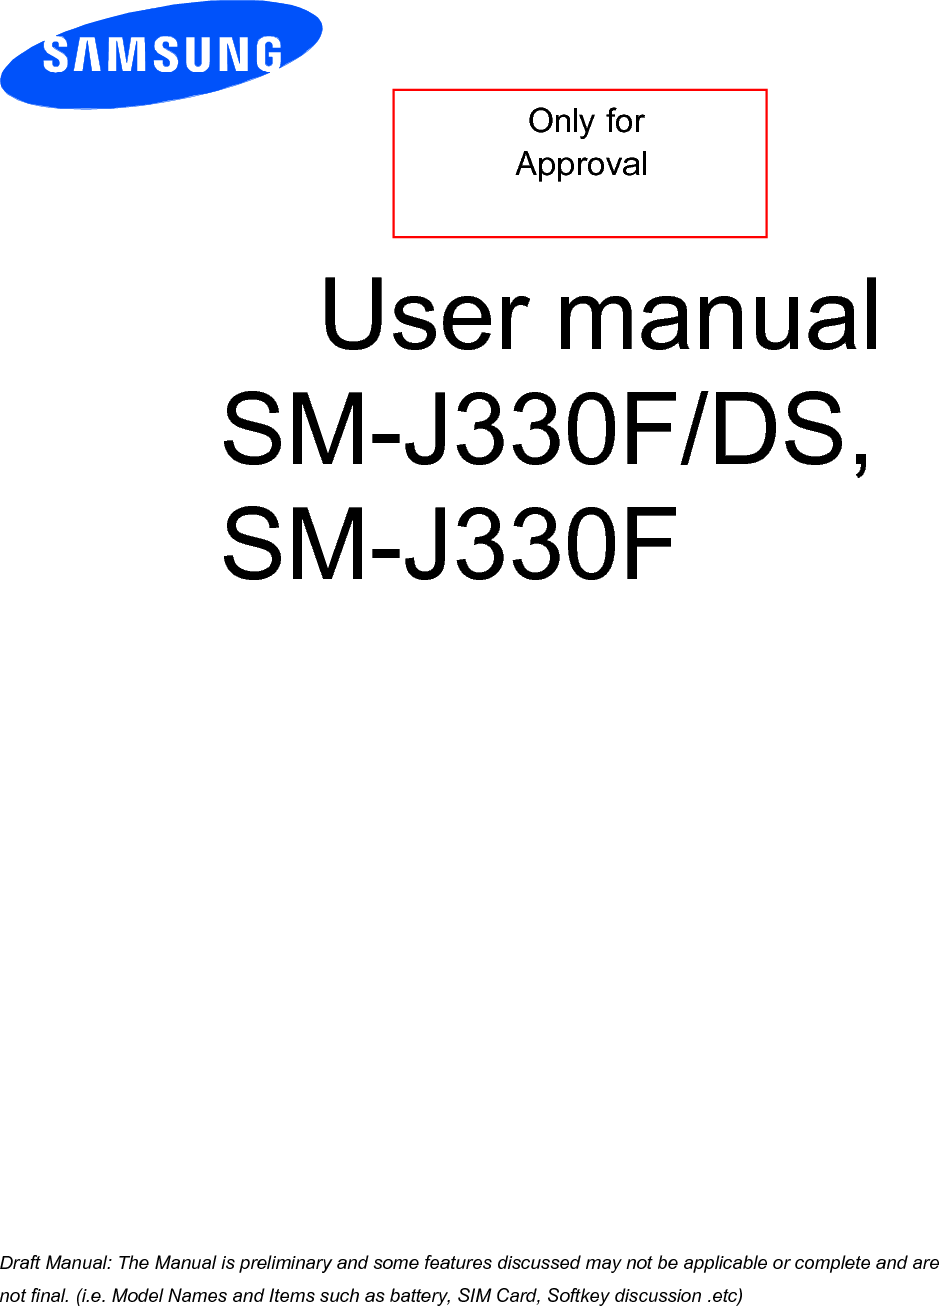  Only for Approval User manual SM-J330F/DS, SM-J330F a ana  ana  na and  a dd a n  aa   and a n na  d a and   a a  ad  dn 